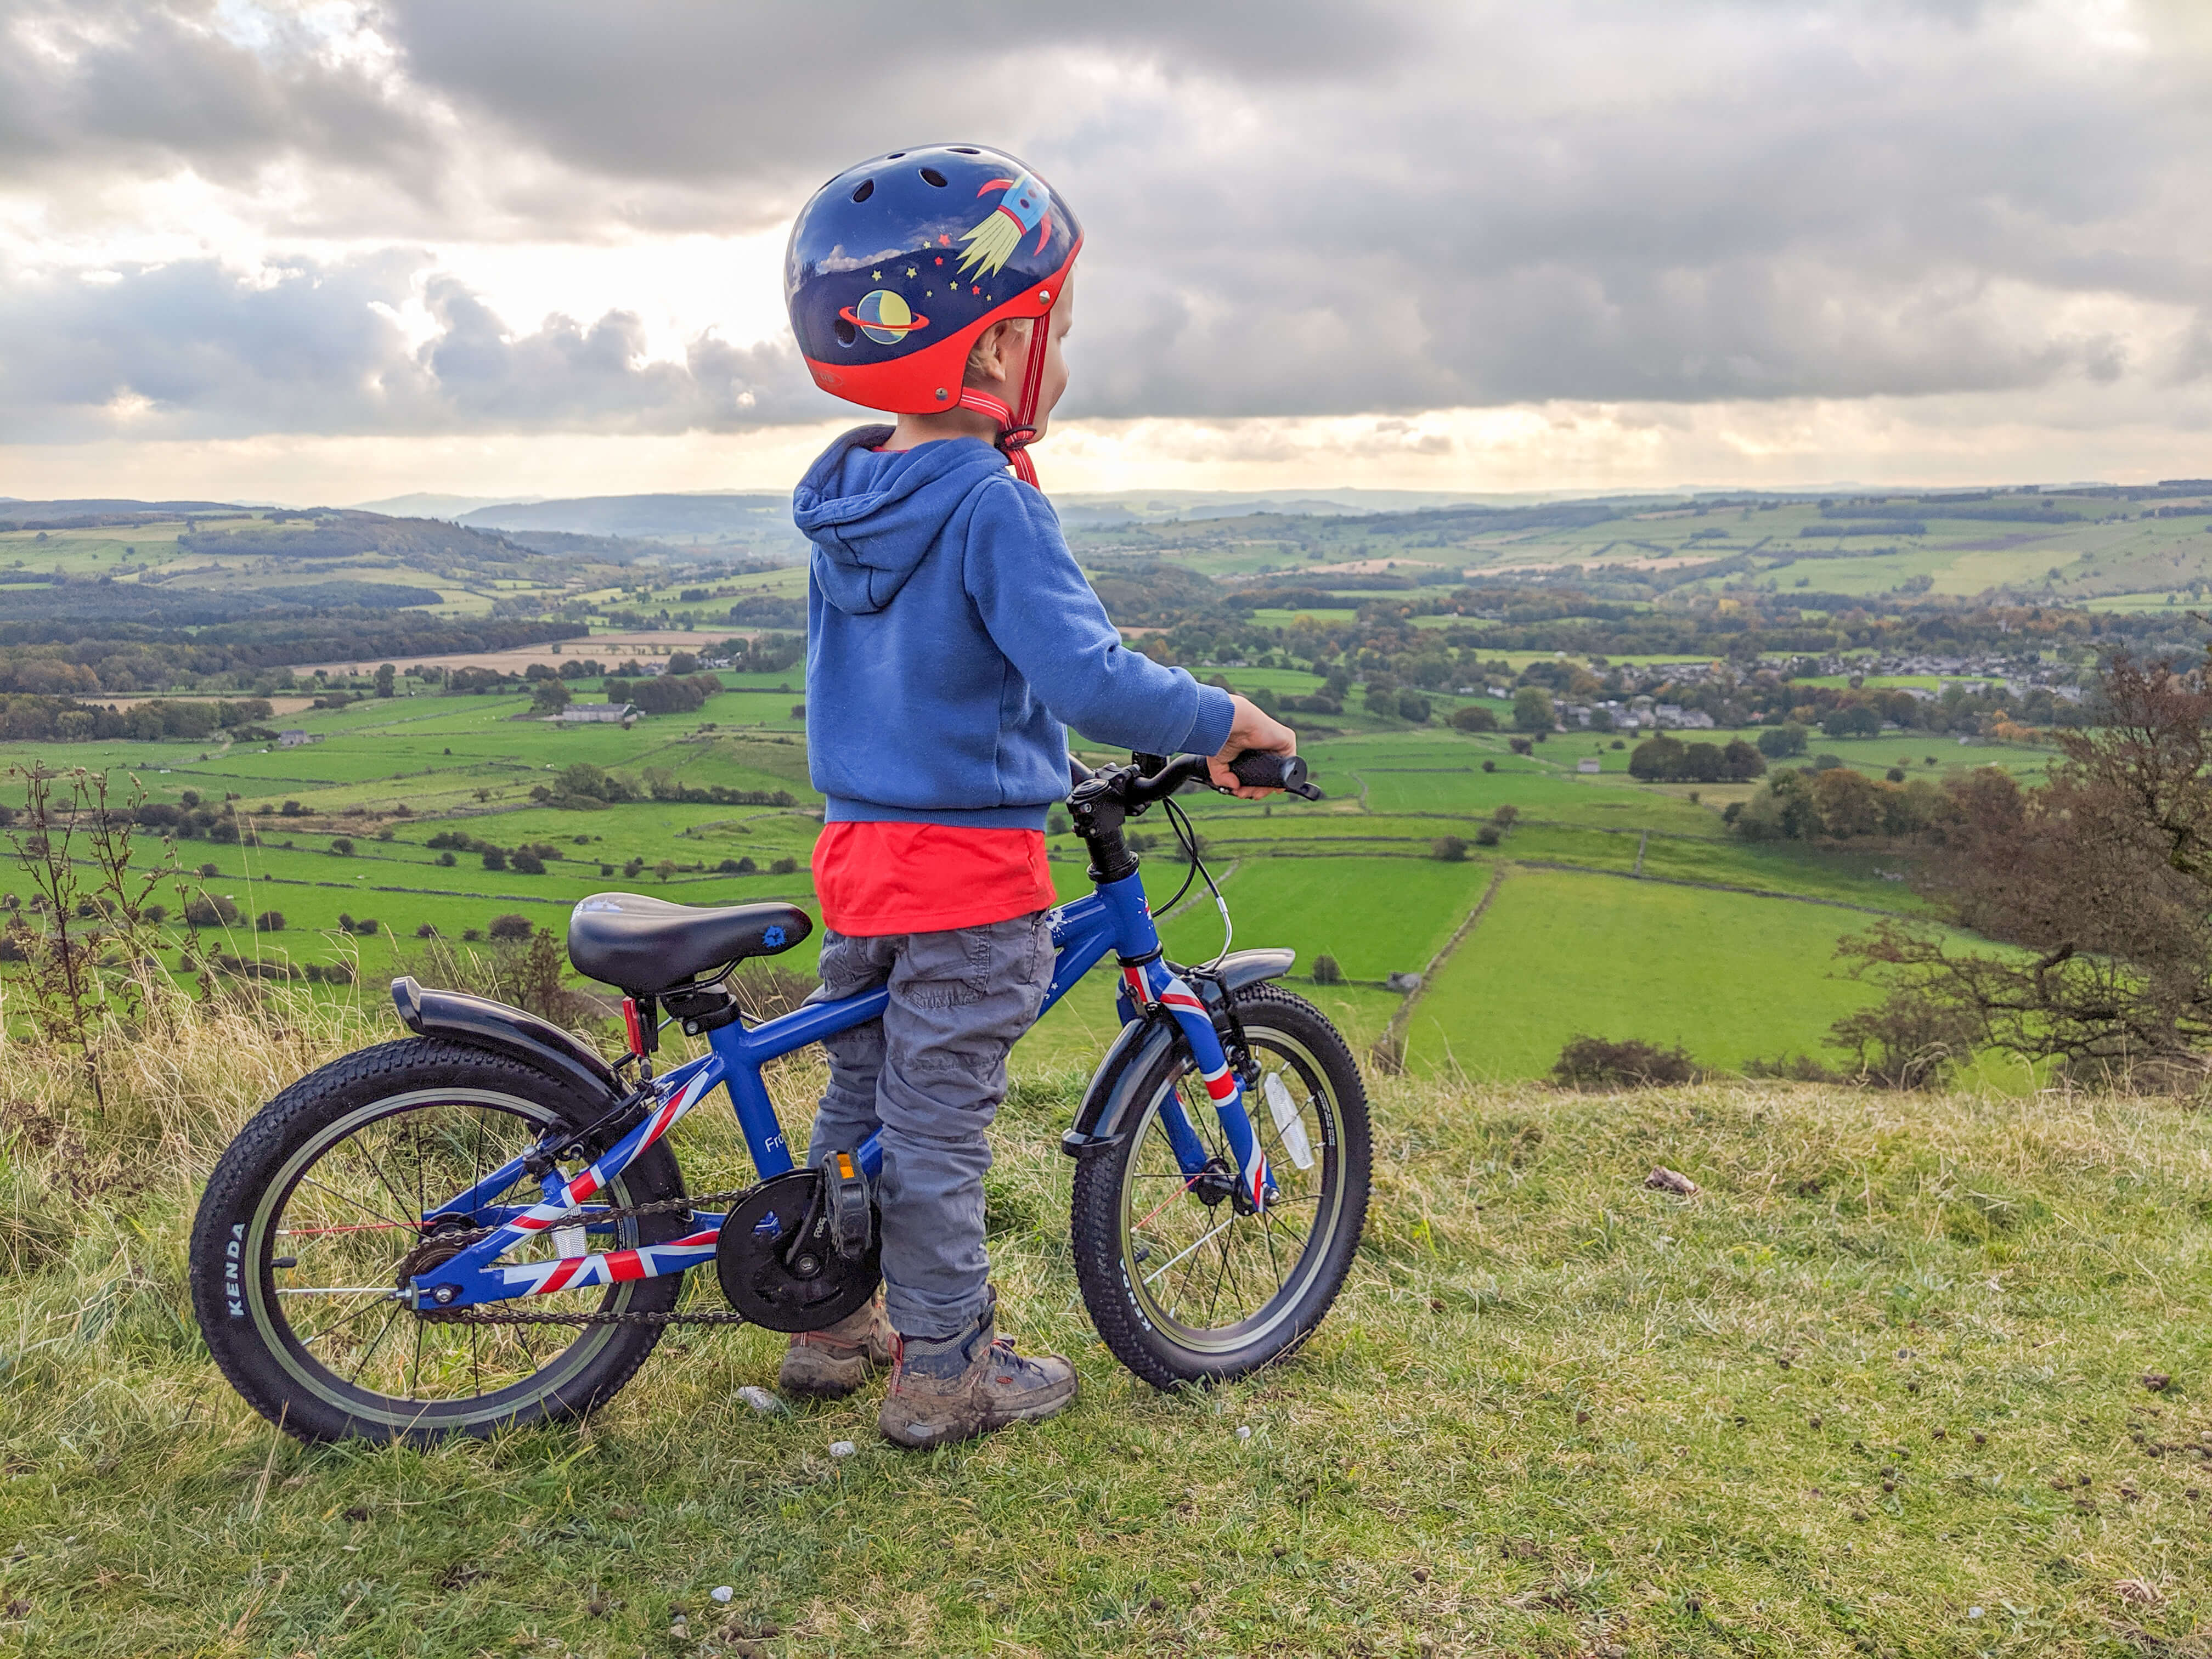 12 Reasons To Give Your Child a Bike this Christmas